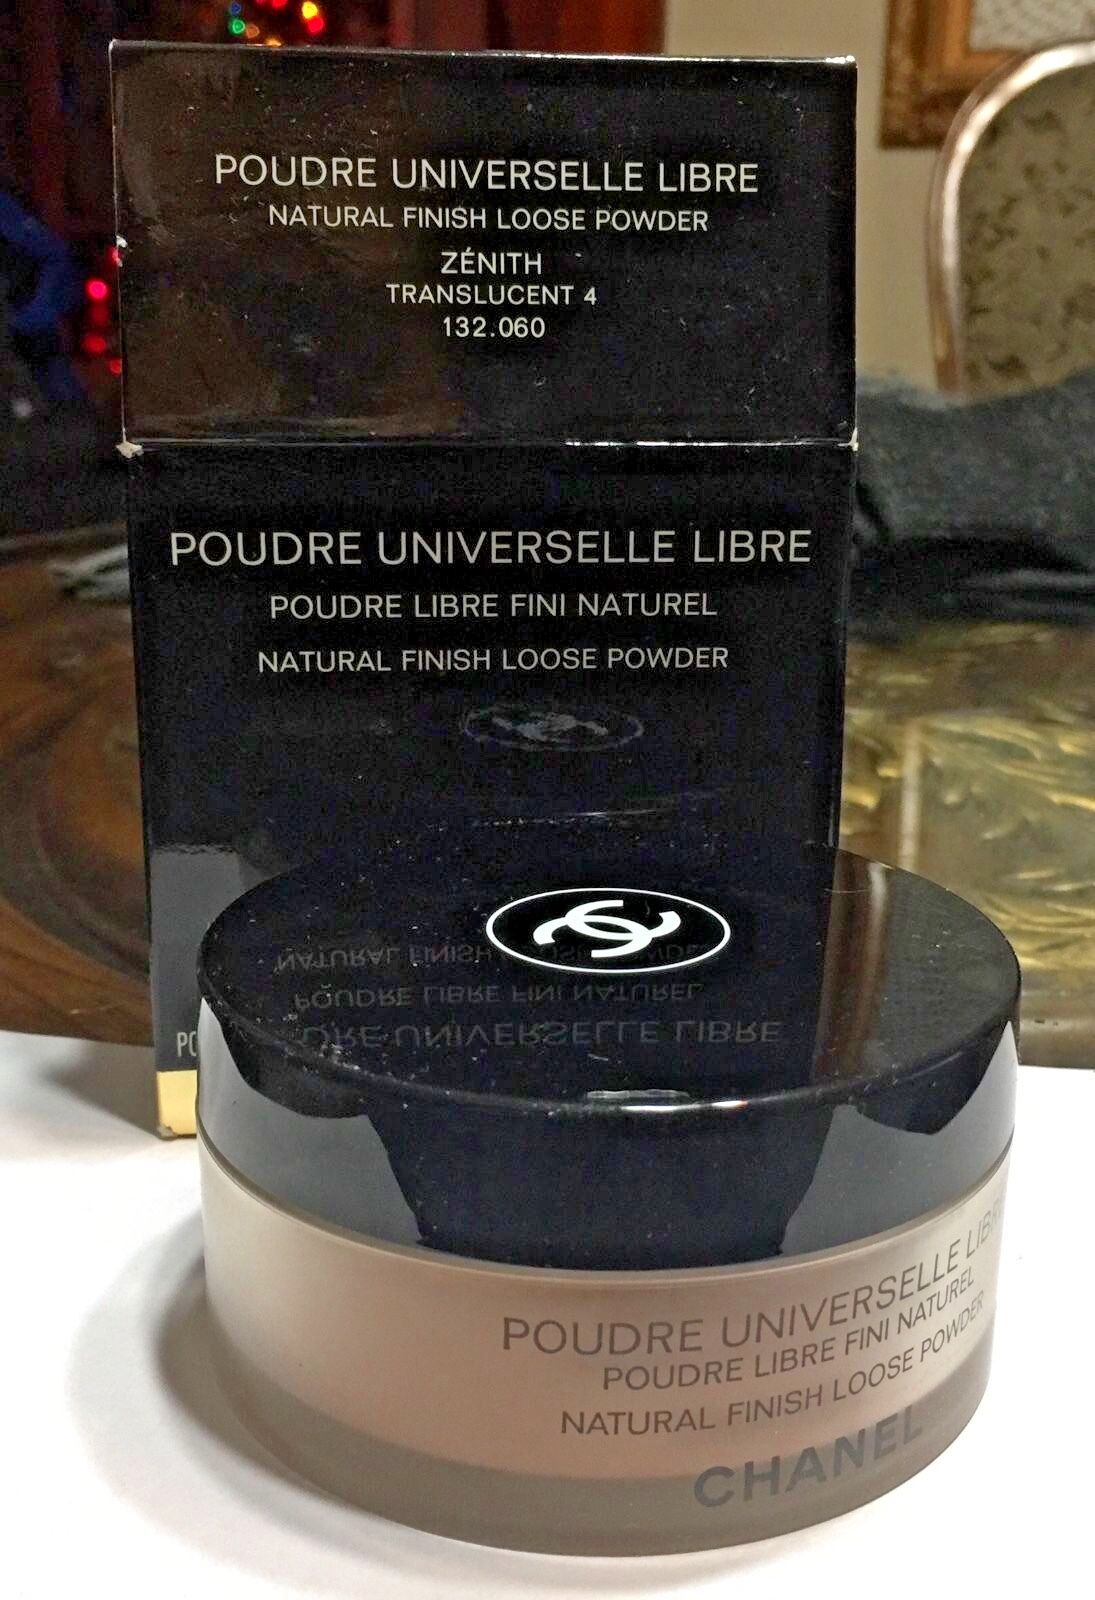 Chanel Poudre Universelle Libre Natural Finish Loose Powder Zénith  translucent